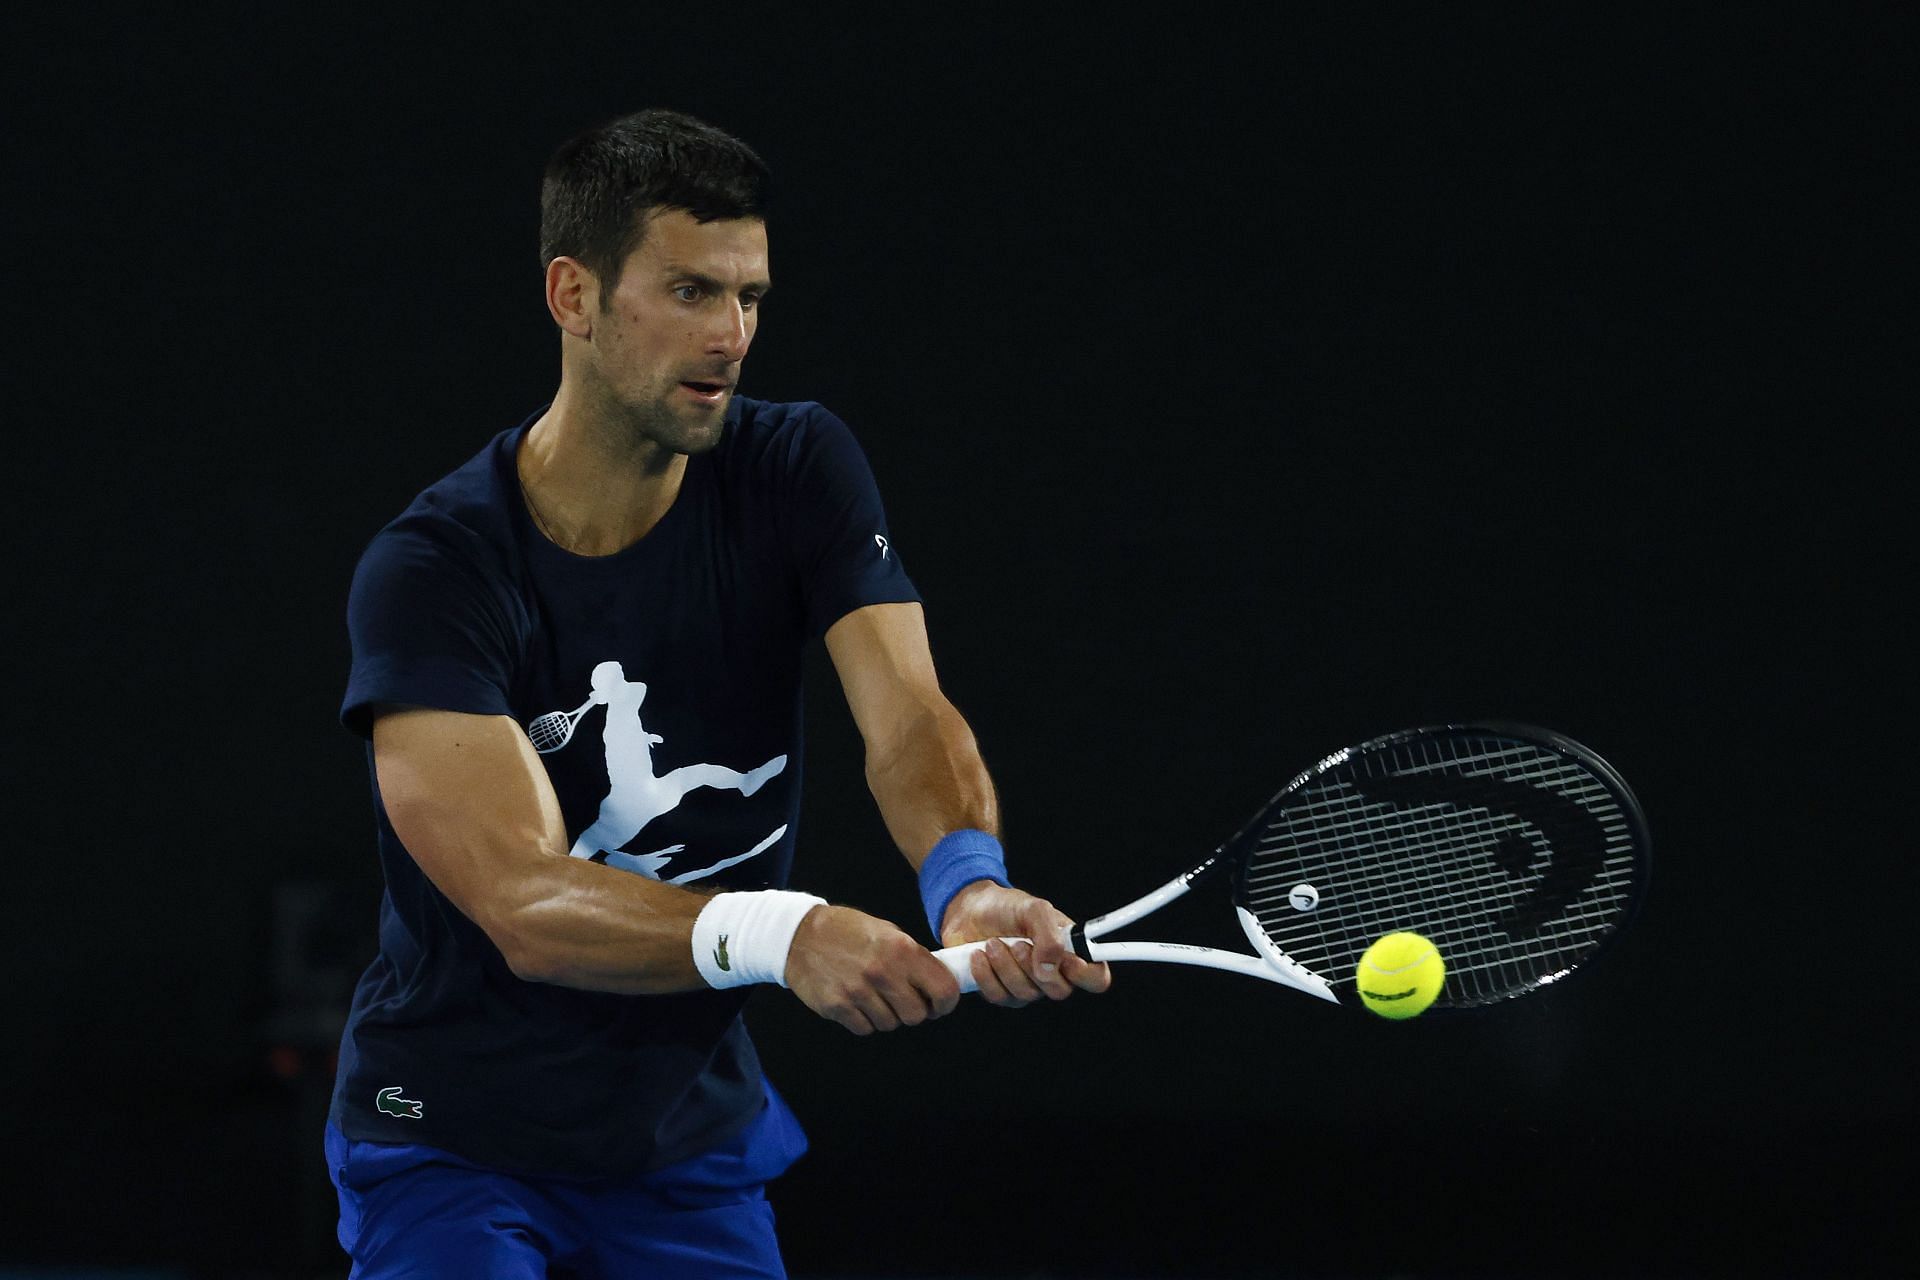 Novak Djokovic may not be able to compete in a number of tournaments due to his vaccination status.